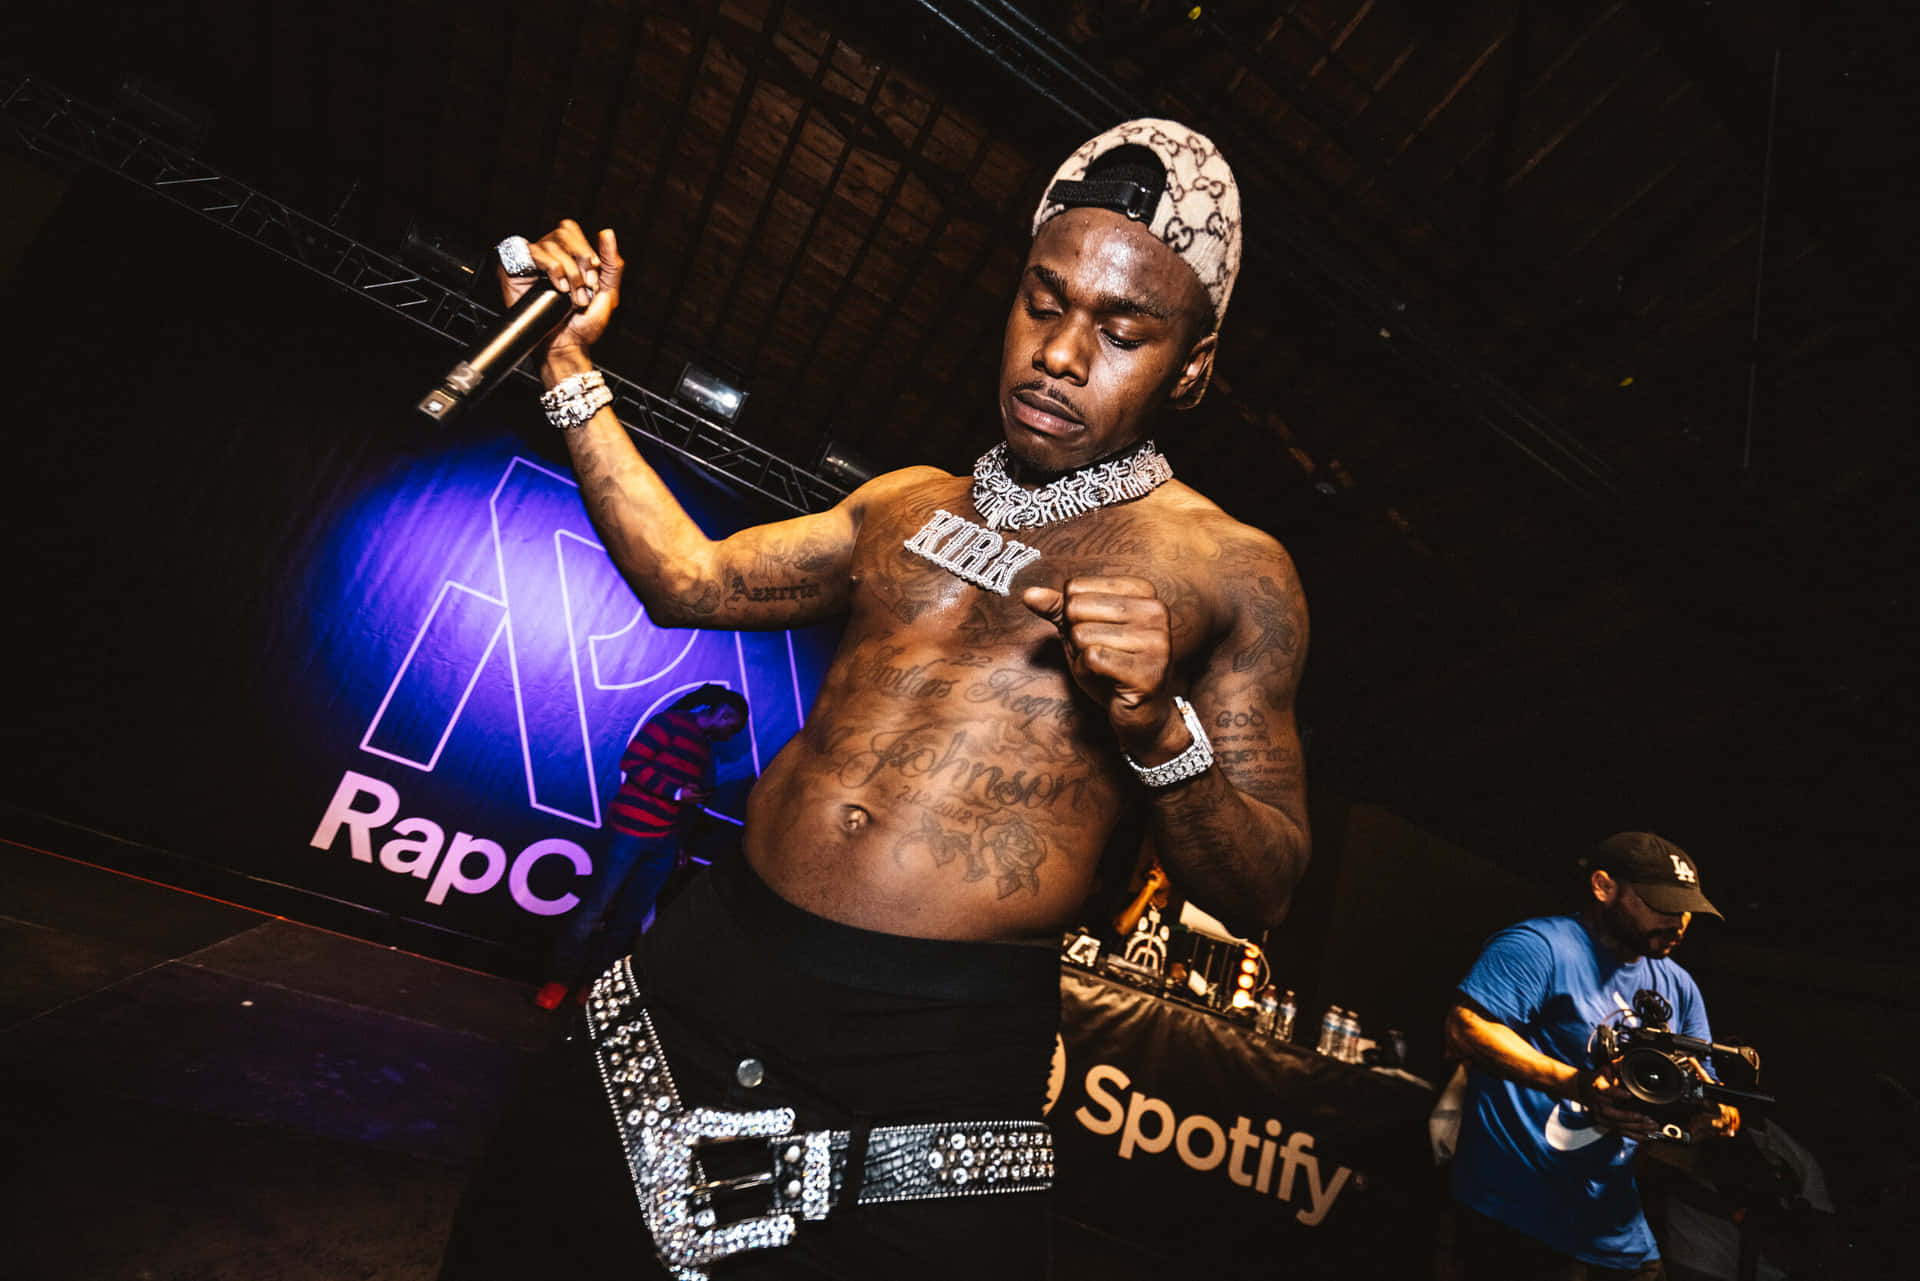 Rapper DaBaby posing in style